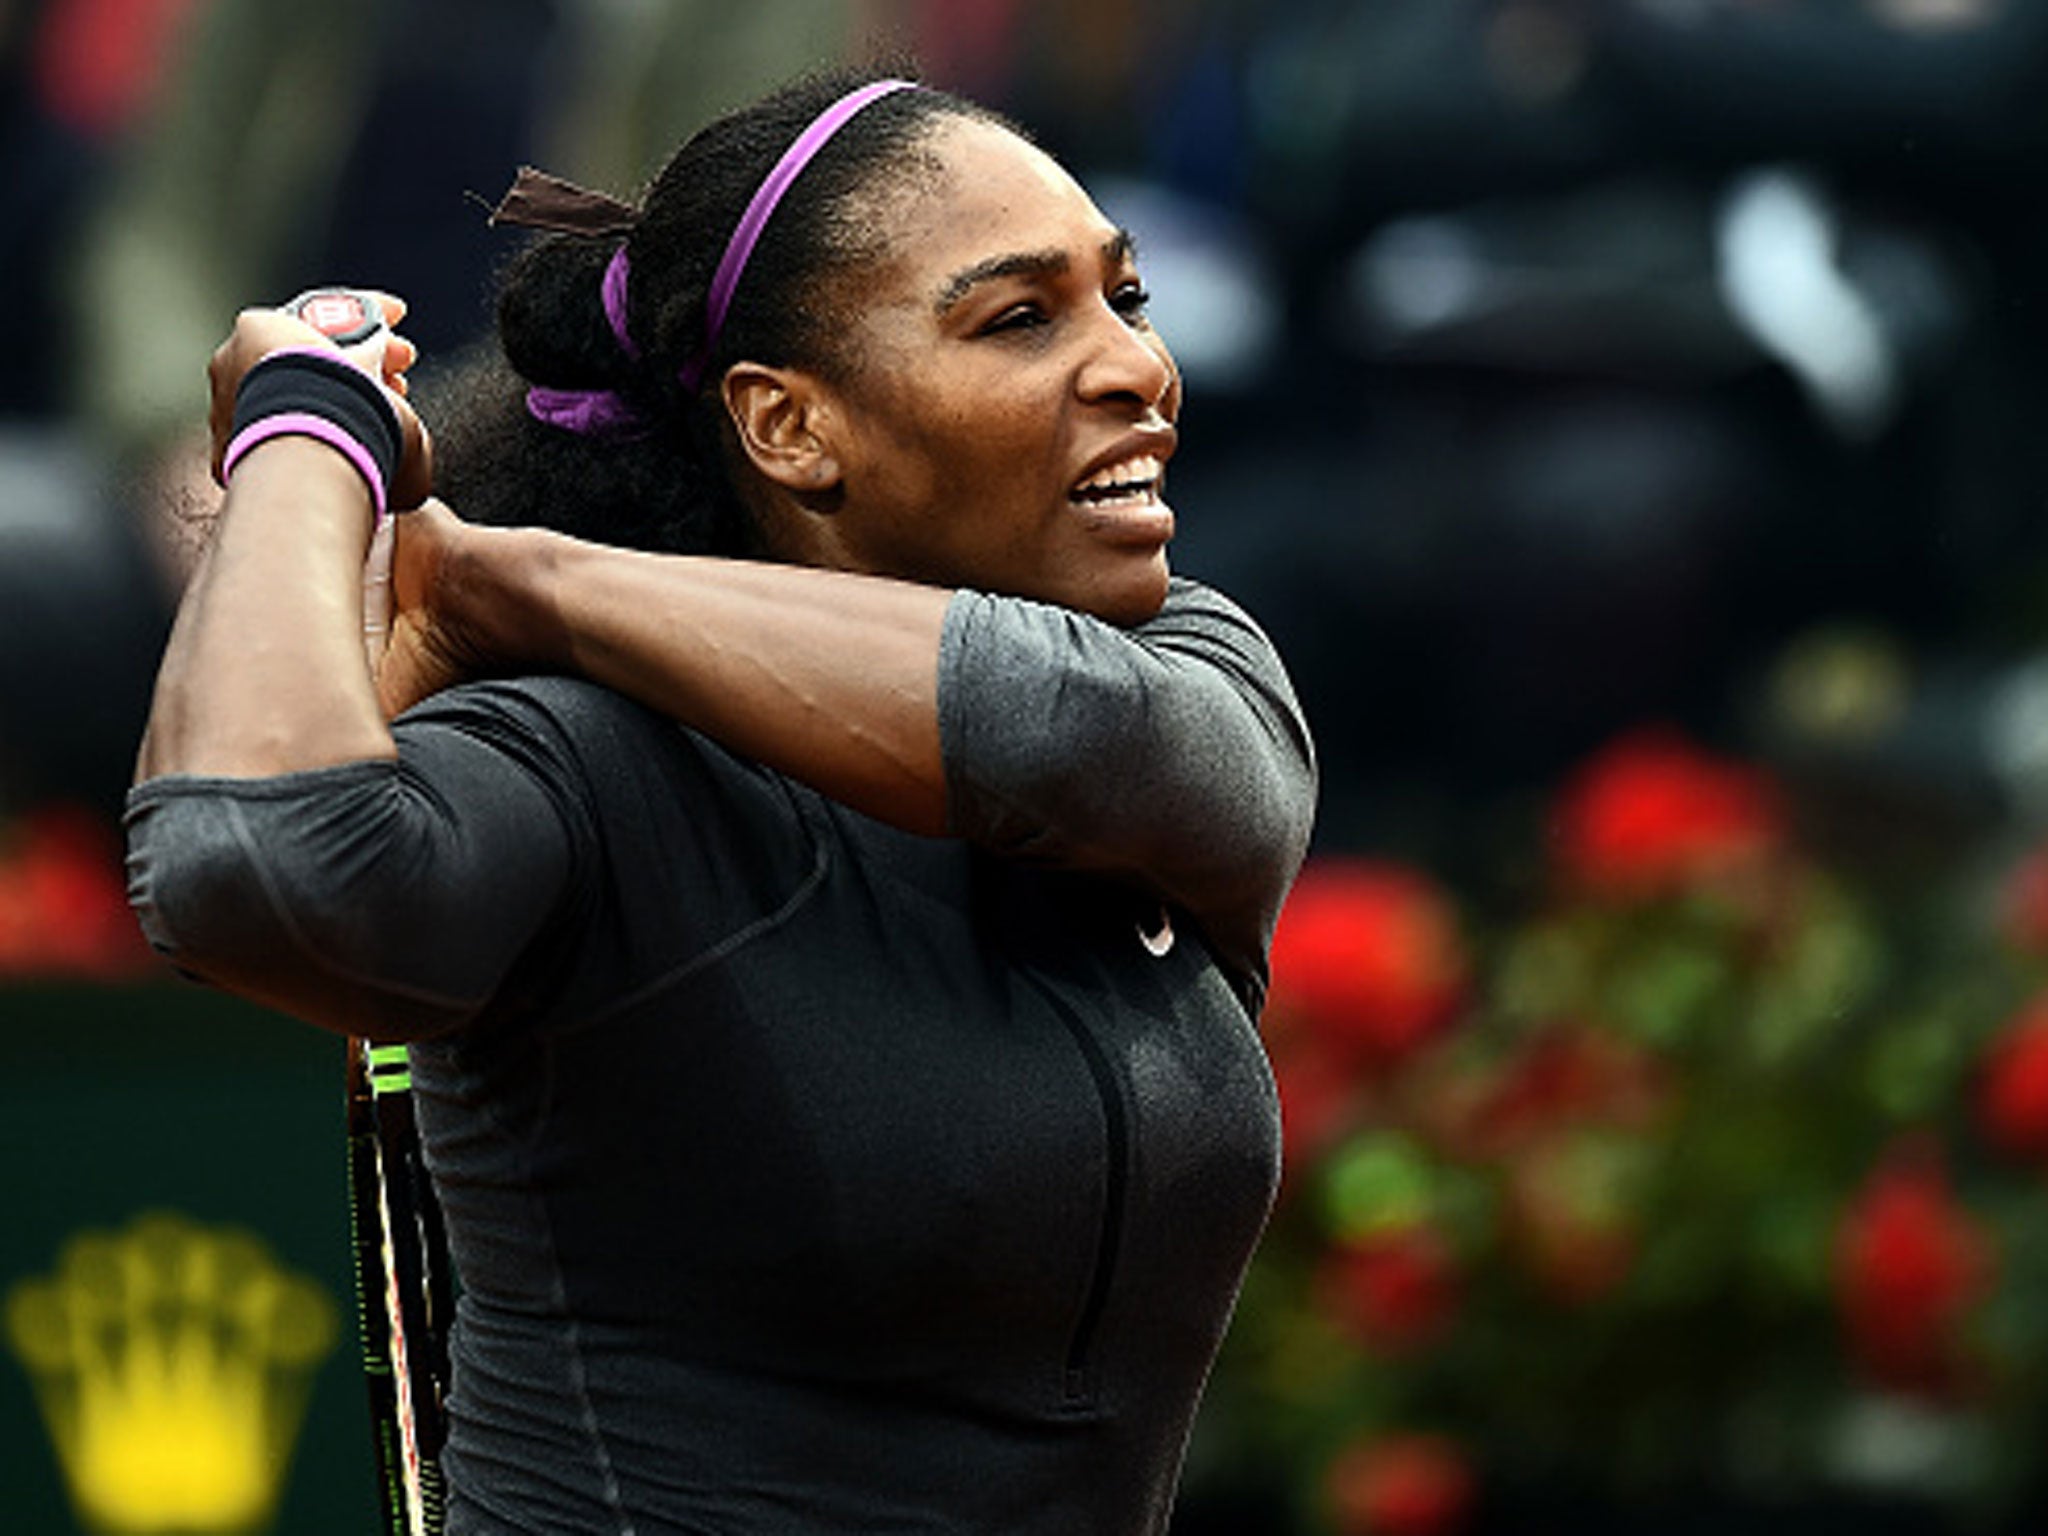 Serena Williams dropped just five games as she overcame Irina-Camelia Begu in the last four of the Rome Masters